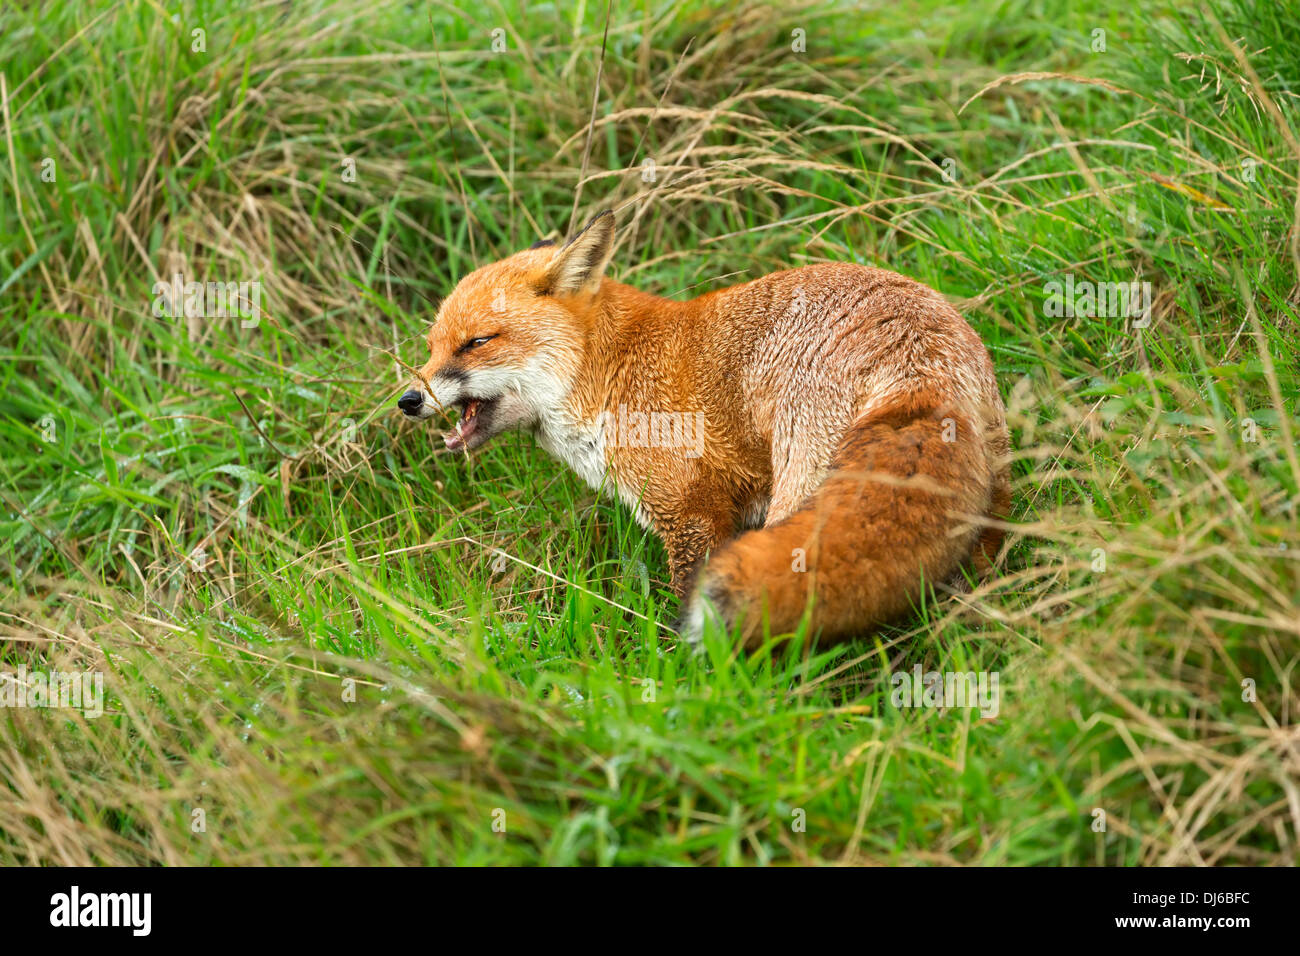 Red fox, Vulpes vulpes. The fox has just eaten a baby chick. Stock Photo